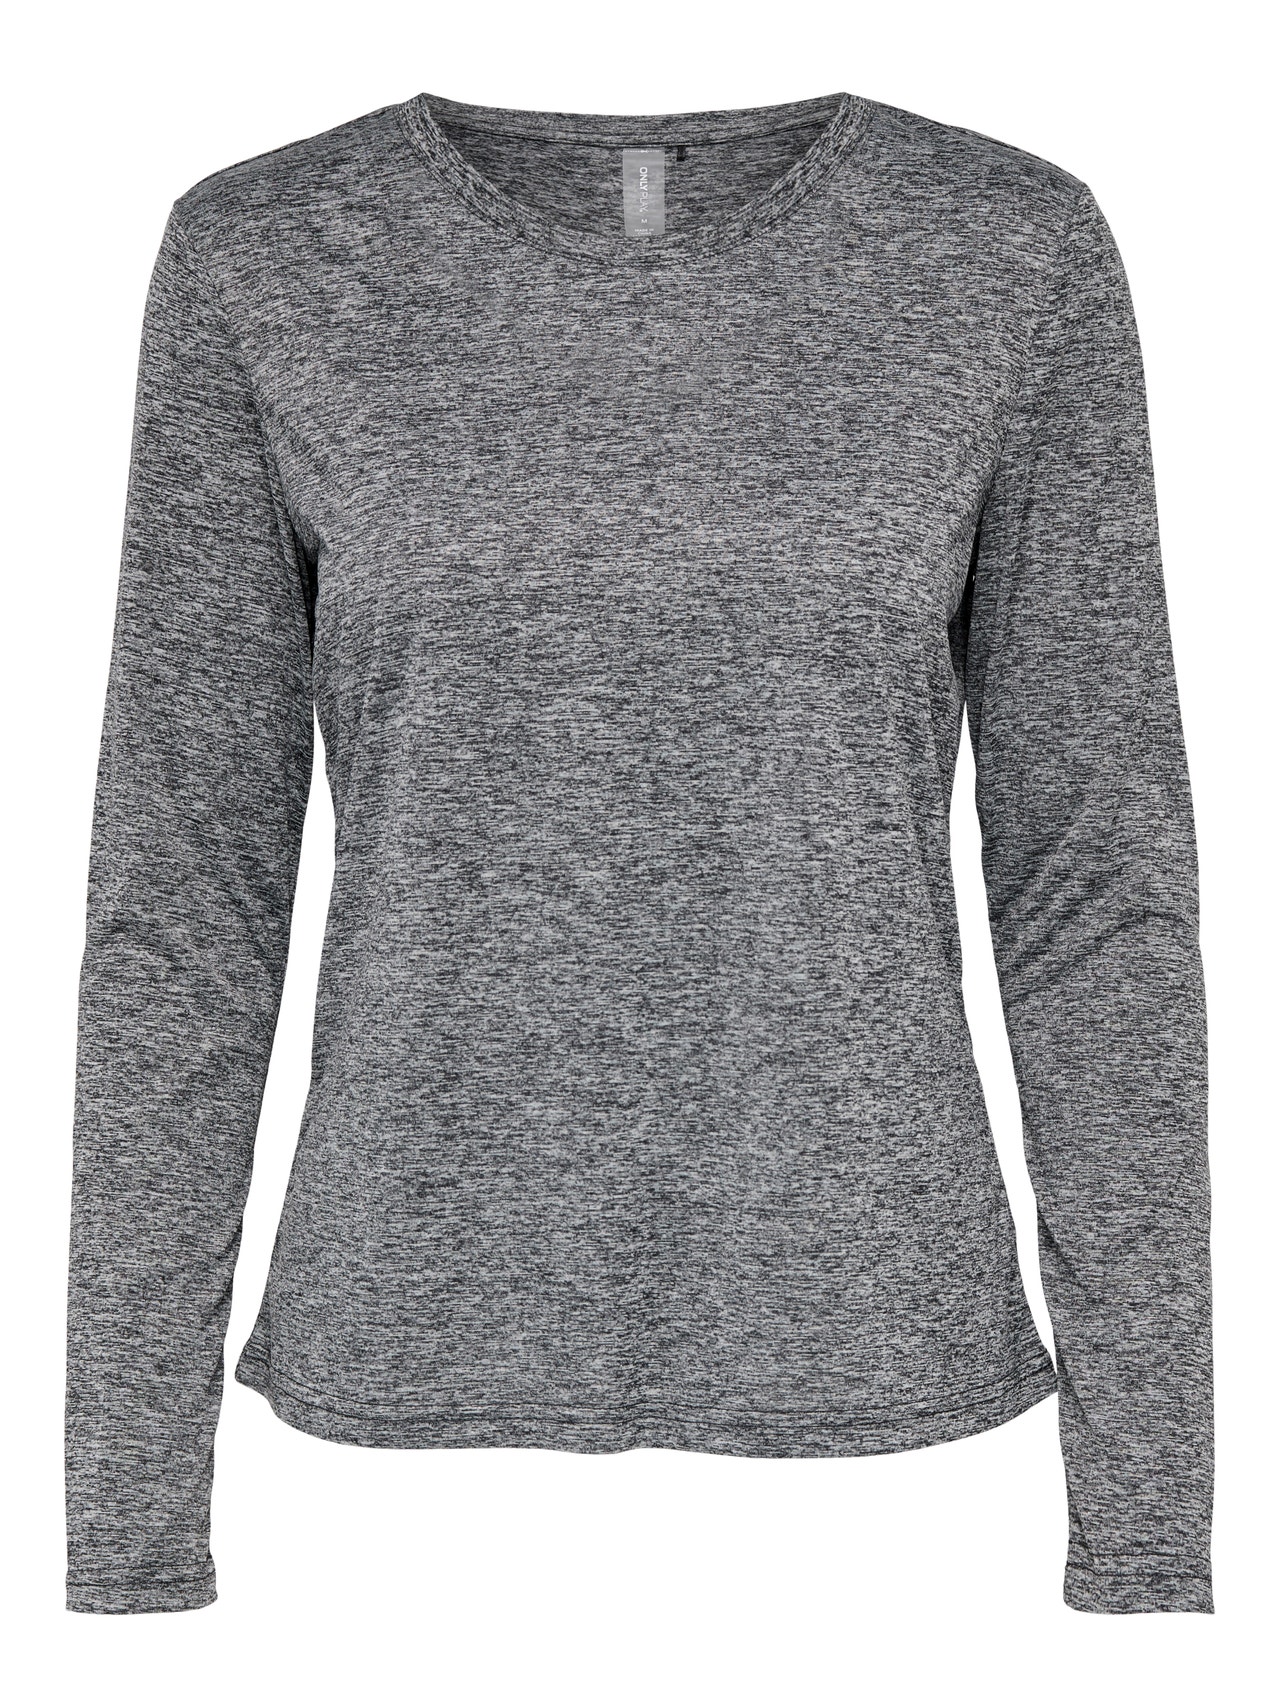 ONLY Long sleeved Training Top -Black - 15274103